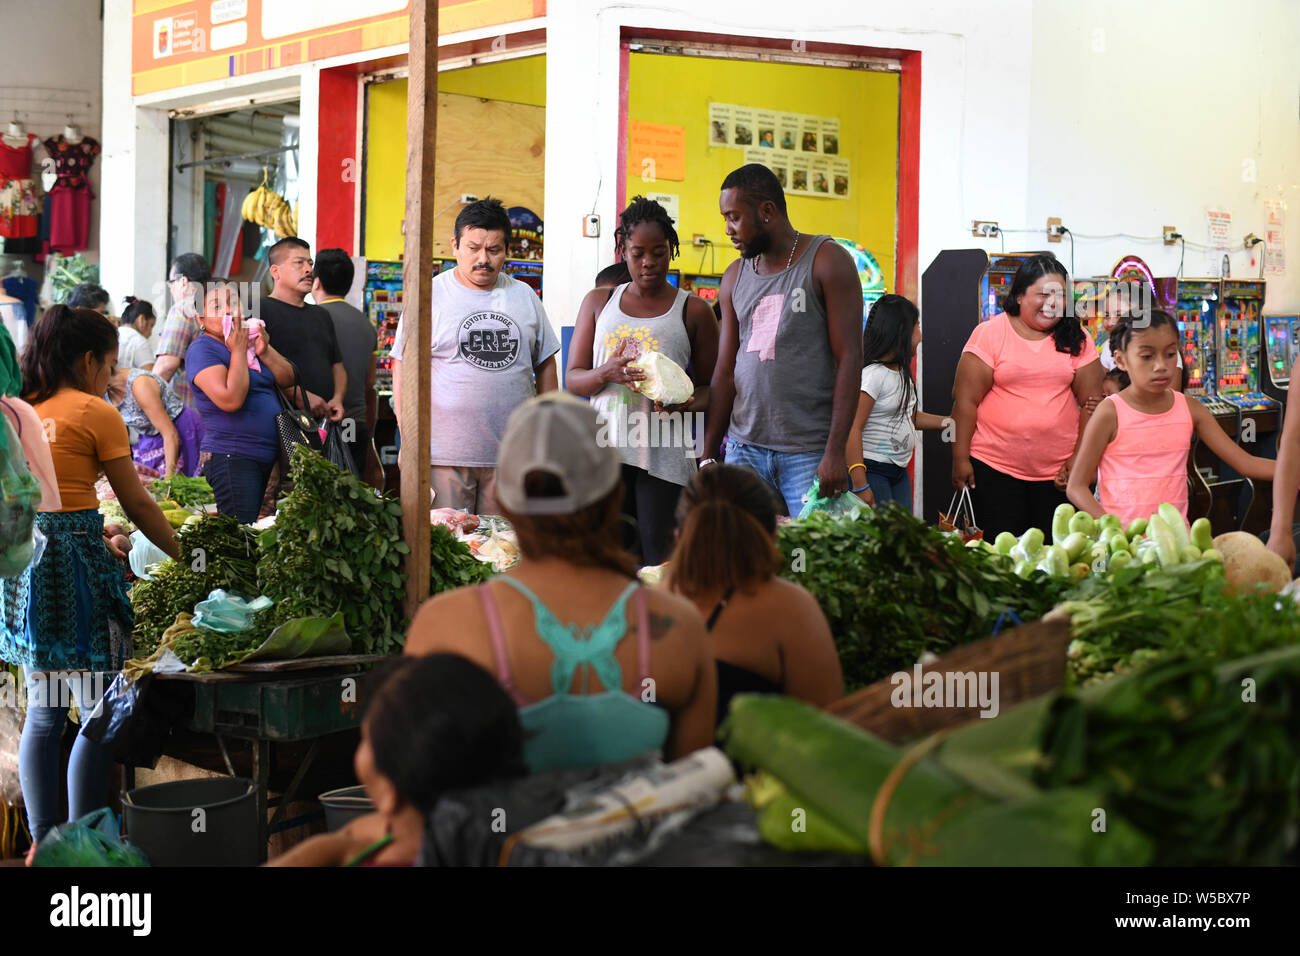 Chiapas, Mexico. 27th July, 2019. The new global melting pot: a Hatian couple bargains for a piece of cabbage in main market in downtown Tapachula. Mexico has witnessed an increase of migrants crossing the country to reach the US, and now hundreds wander the streets of this southern Mexican city, which is becoming one more new global melting pot. Credit: ZUMA Press, Inc./Alamy Live News Stock Photo